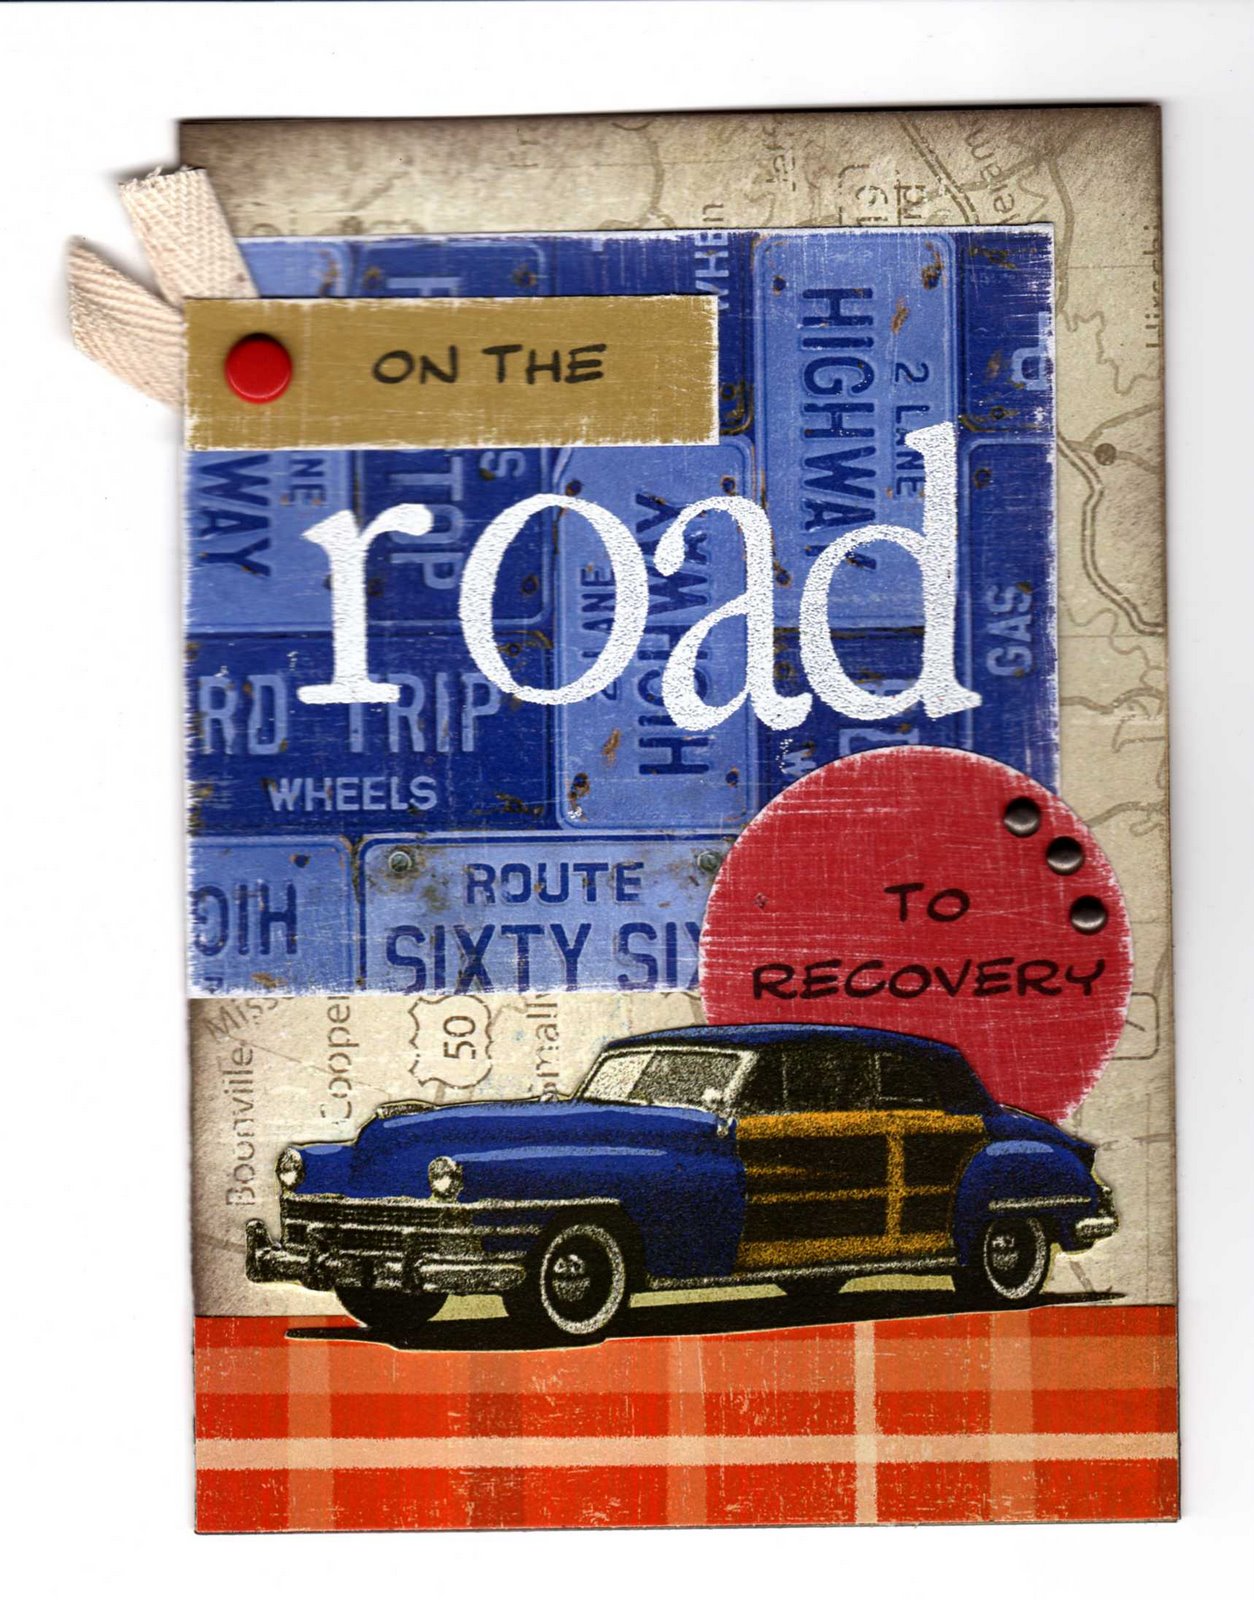 [on+the+road+card001.jpg]